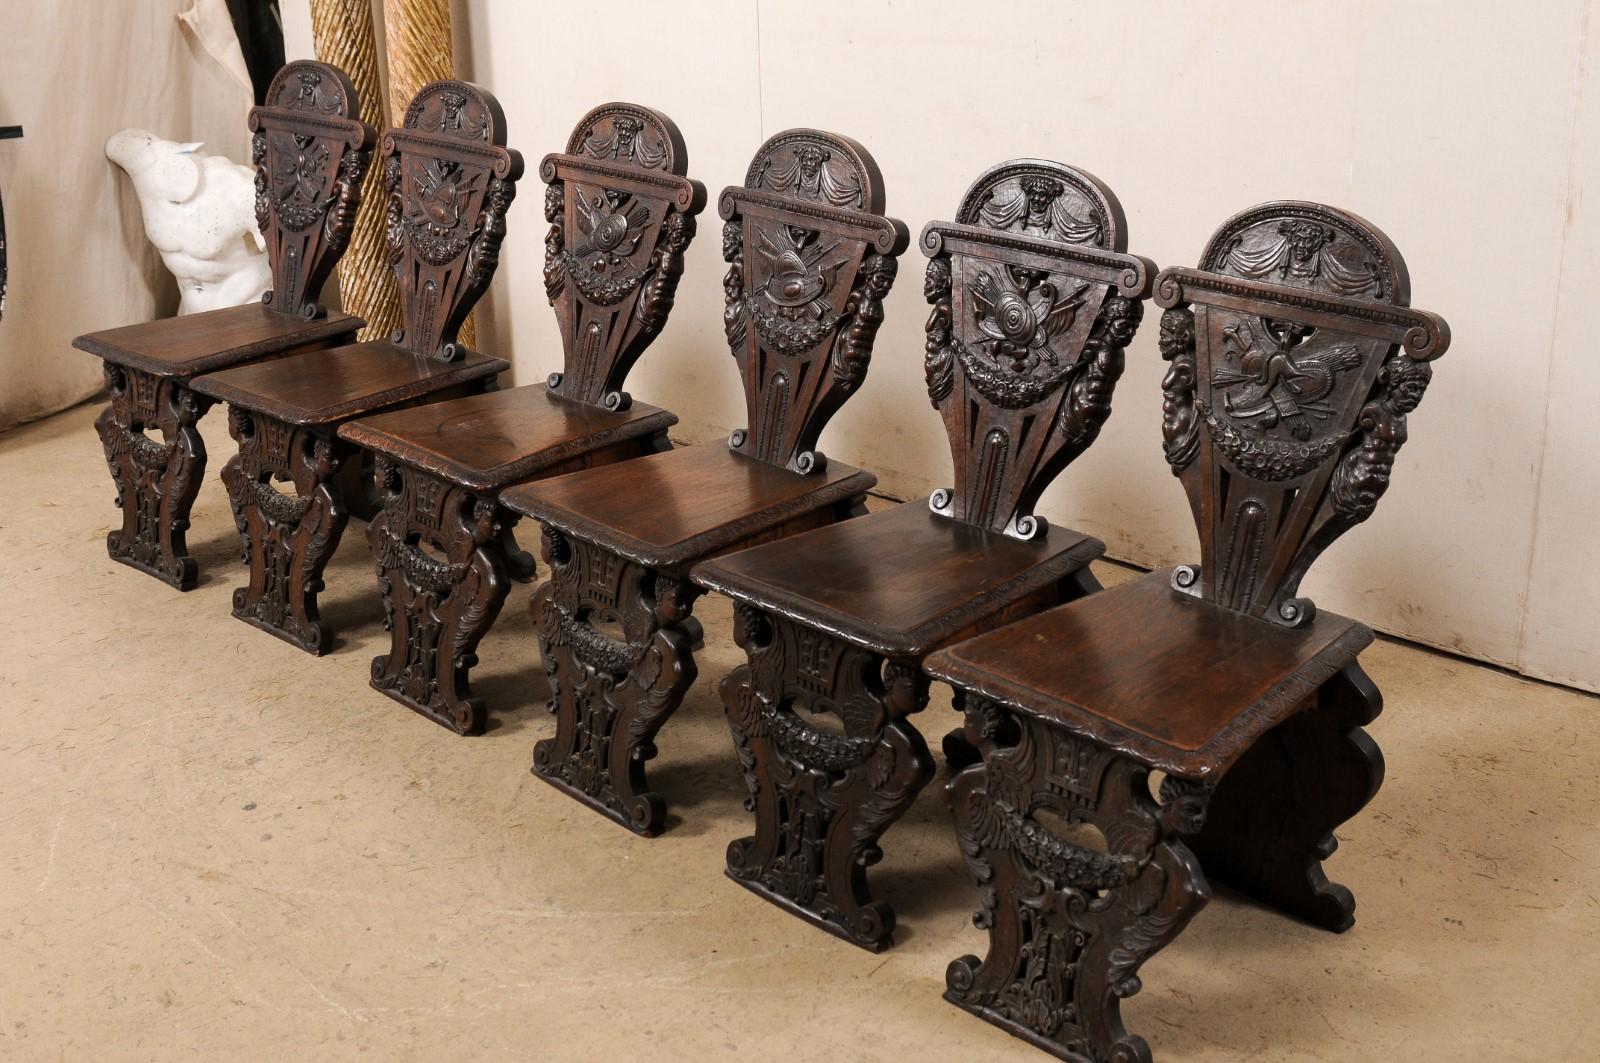 19th Century Set of 6 English Renaissance Ornately-Carved Hall Chairs, Turn of 19th & 20th C For Sale